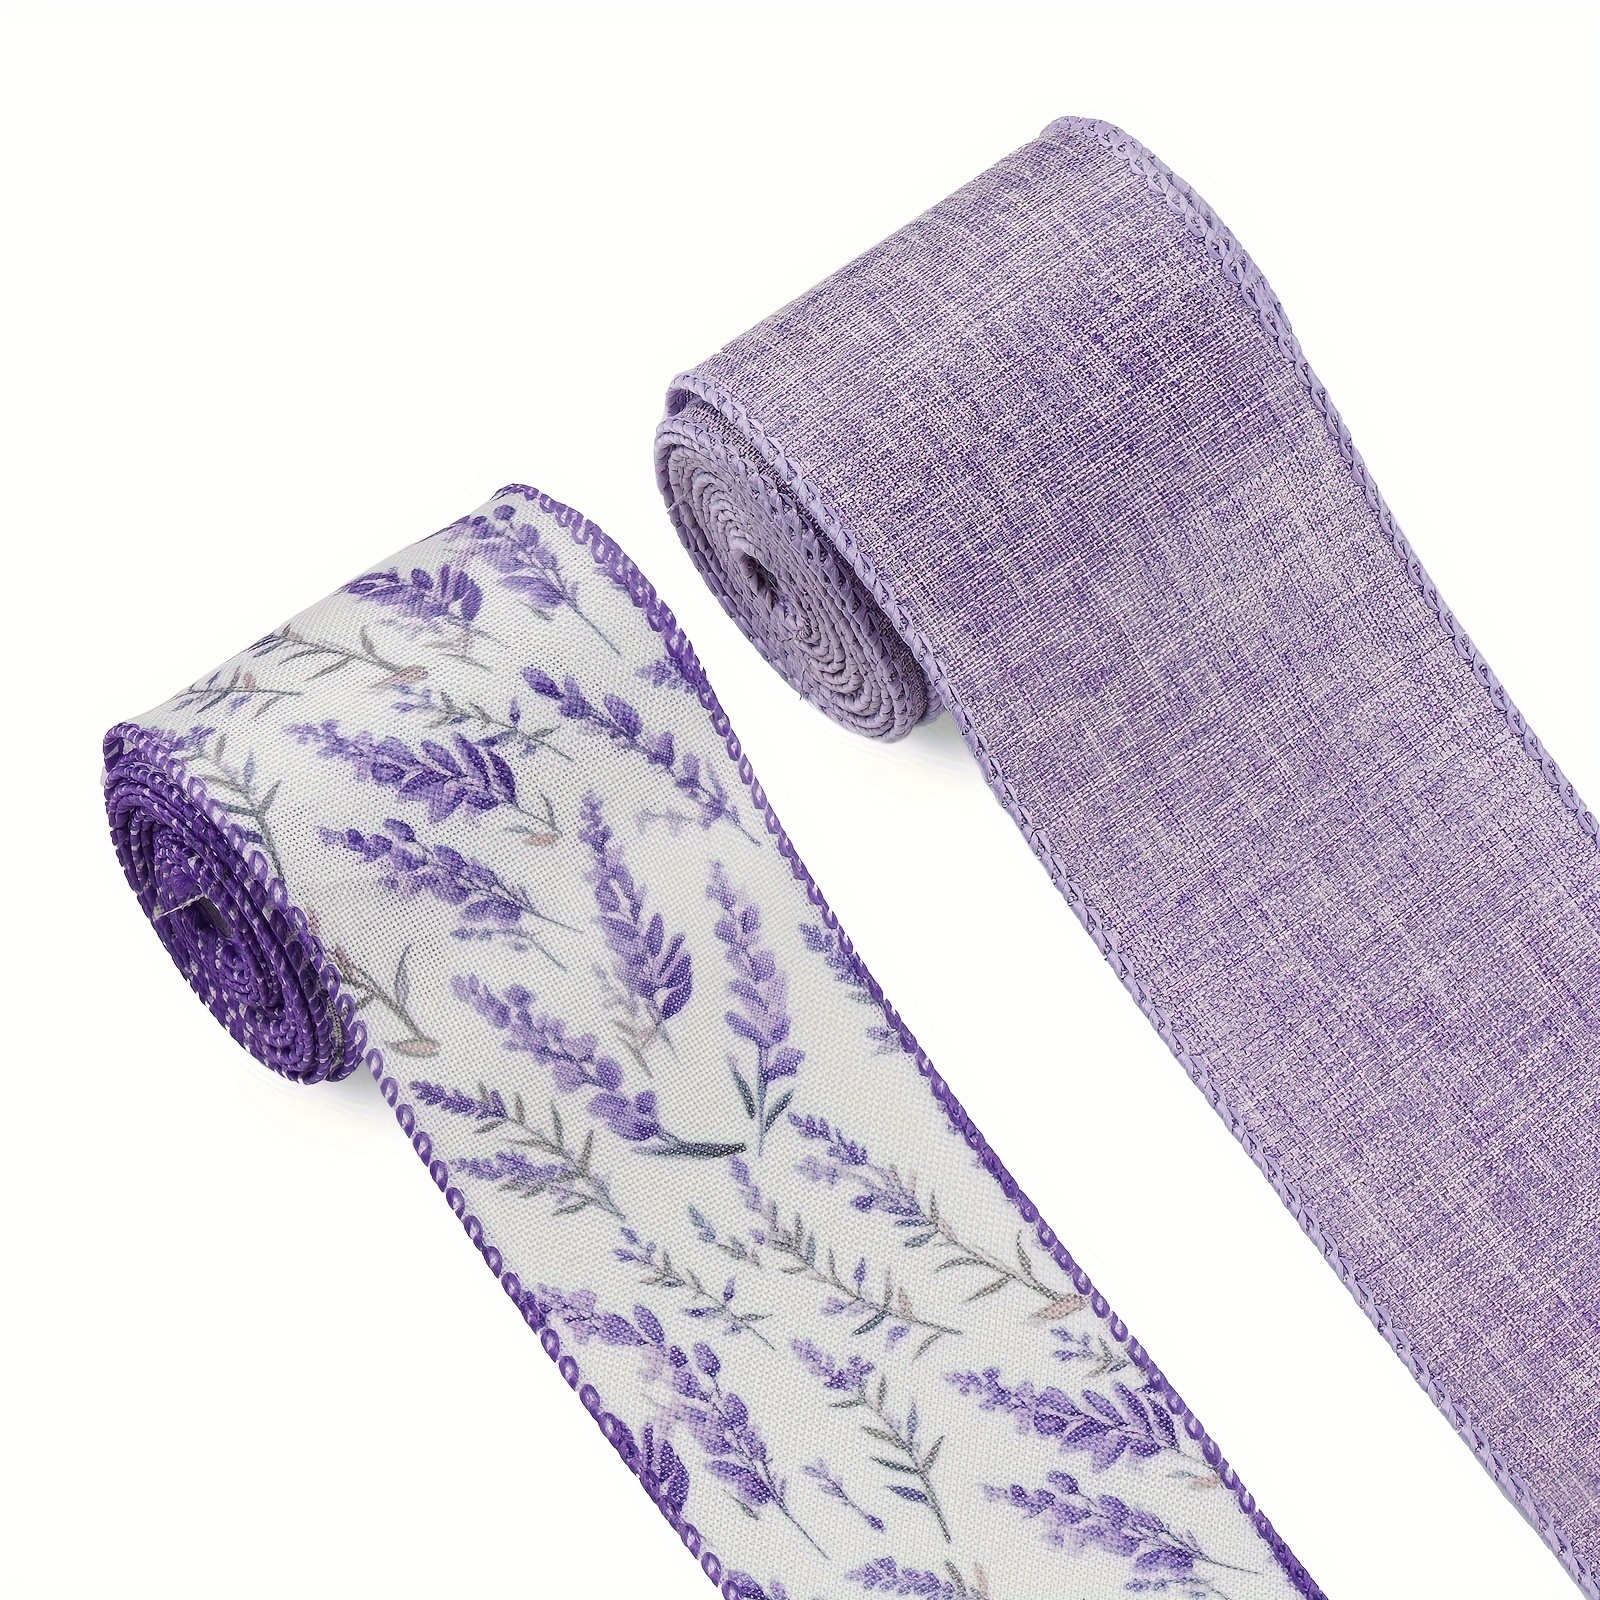 

2-piece Lavender Summer Ribbon - 2.5" X 5 Yards, Purple Wired Edge For Diy Crafts, Gift Wrapping, Beach Slipper Decorations & Birthday Party Favors Lavender Party Decorations Lavender Tablecloth